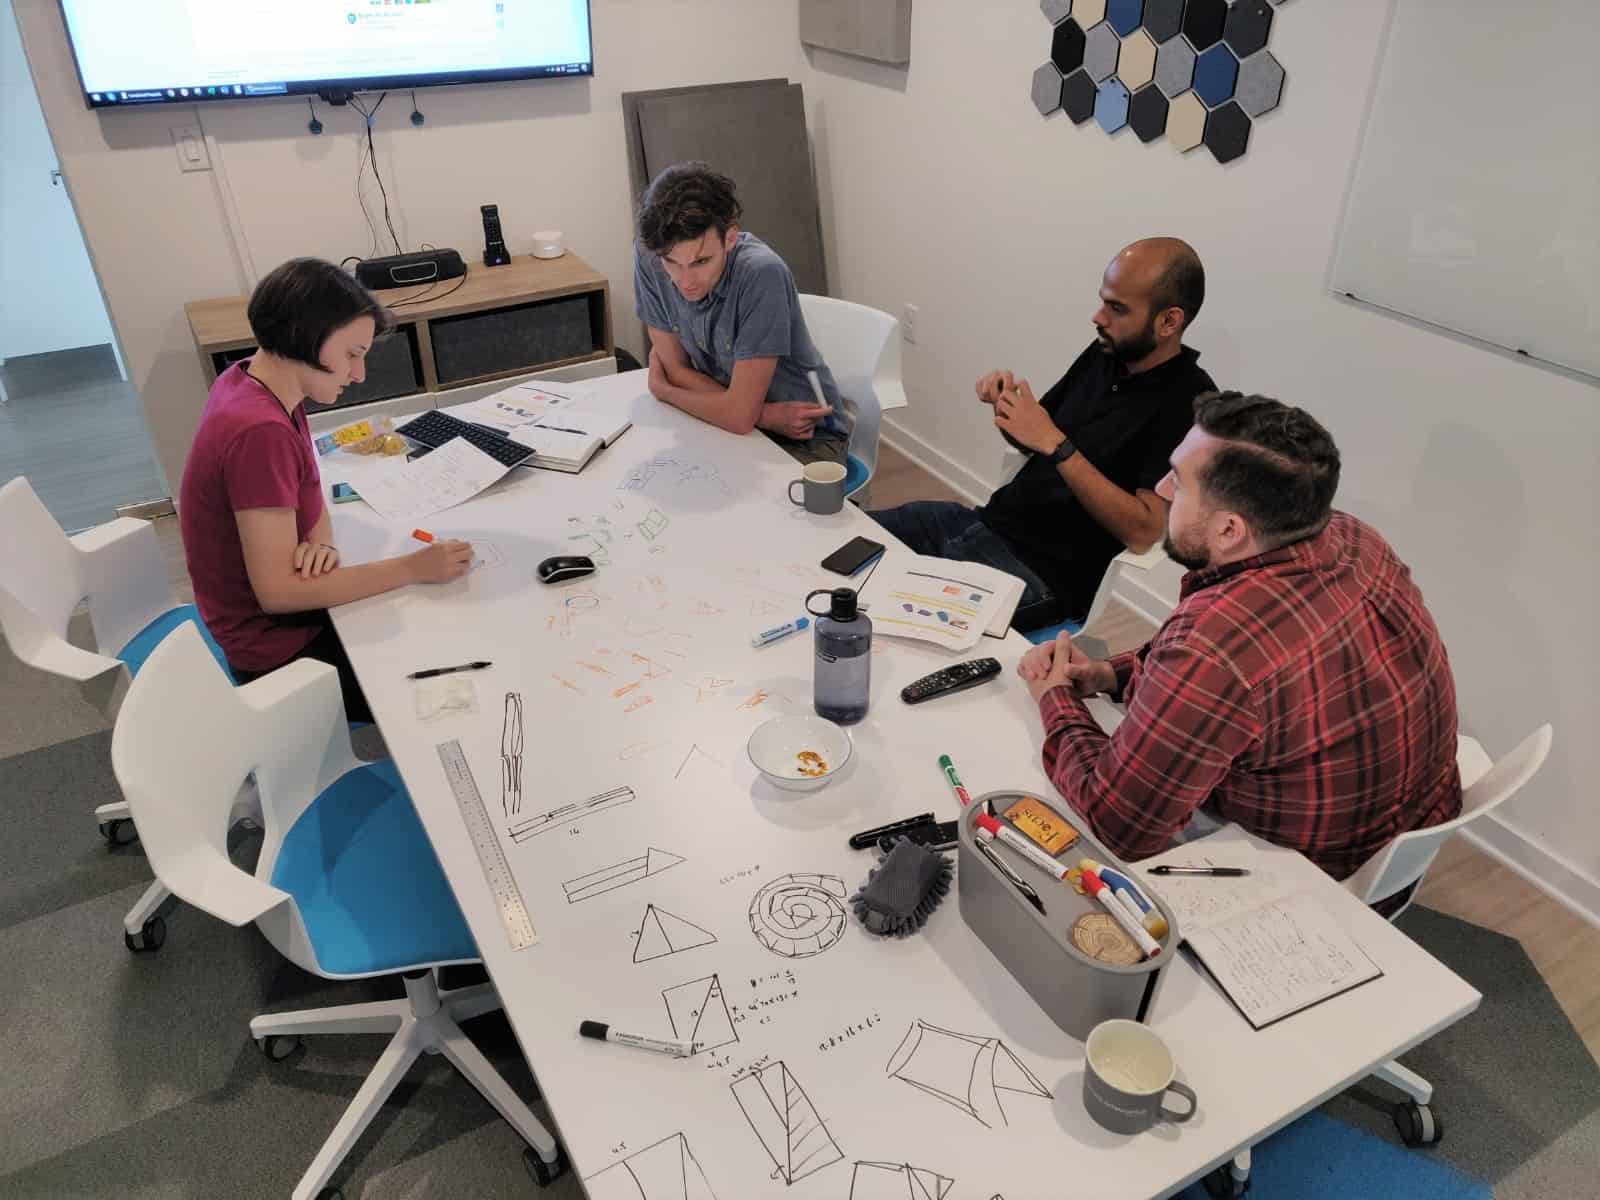 The Produktworks team during a brainstorming session